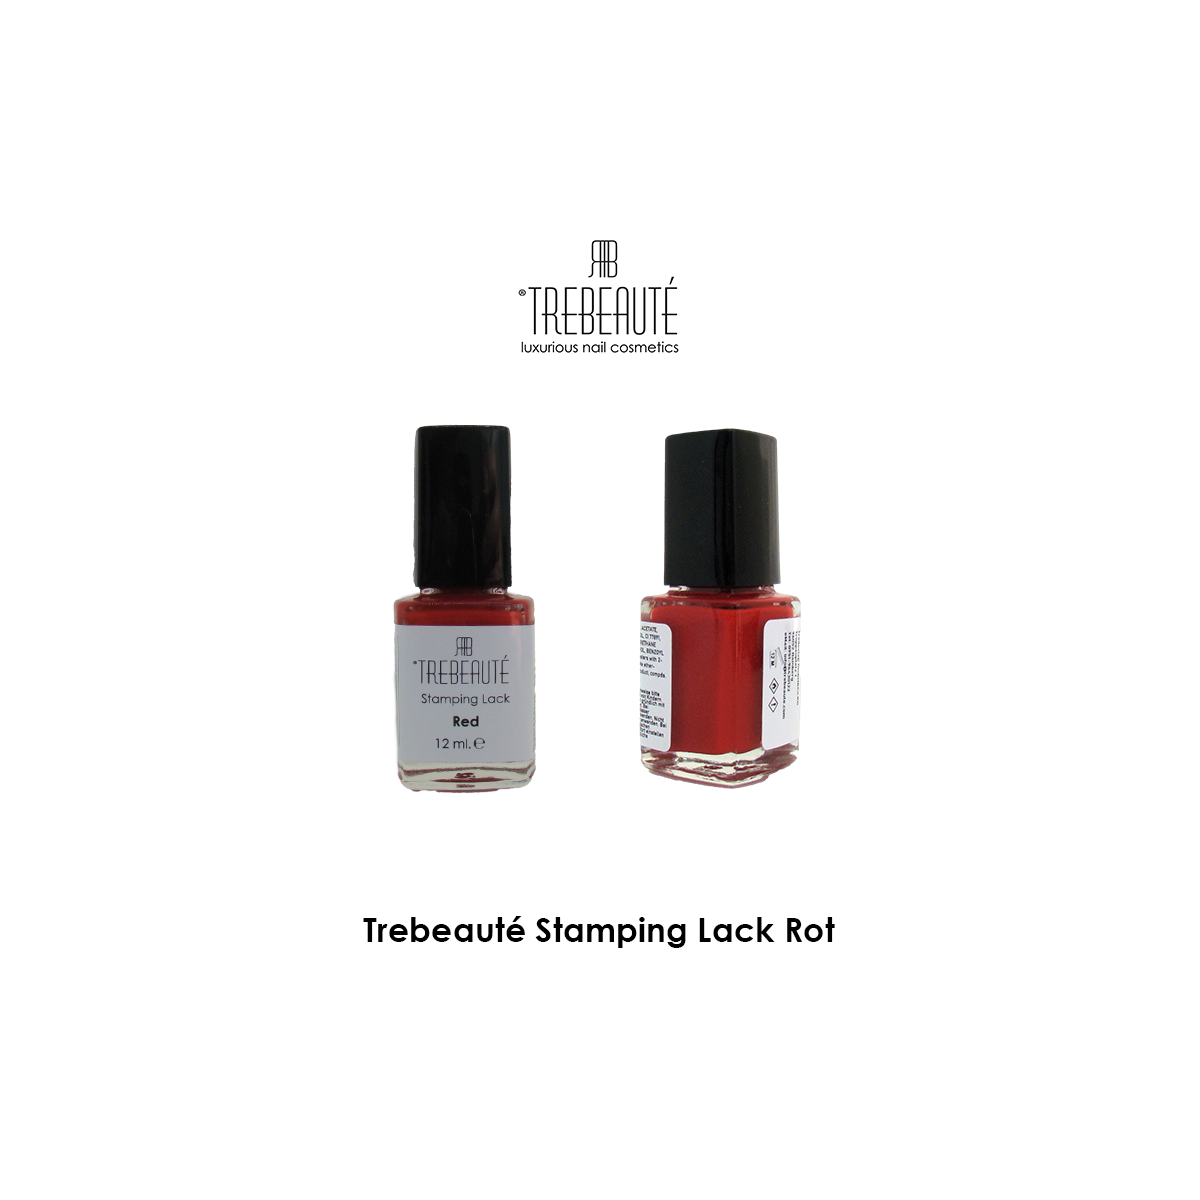 Trebeauté Stamping Lack - Rot - 12ml